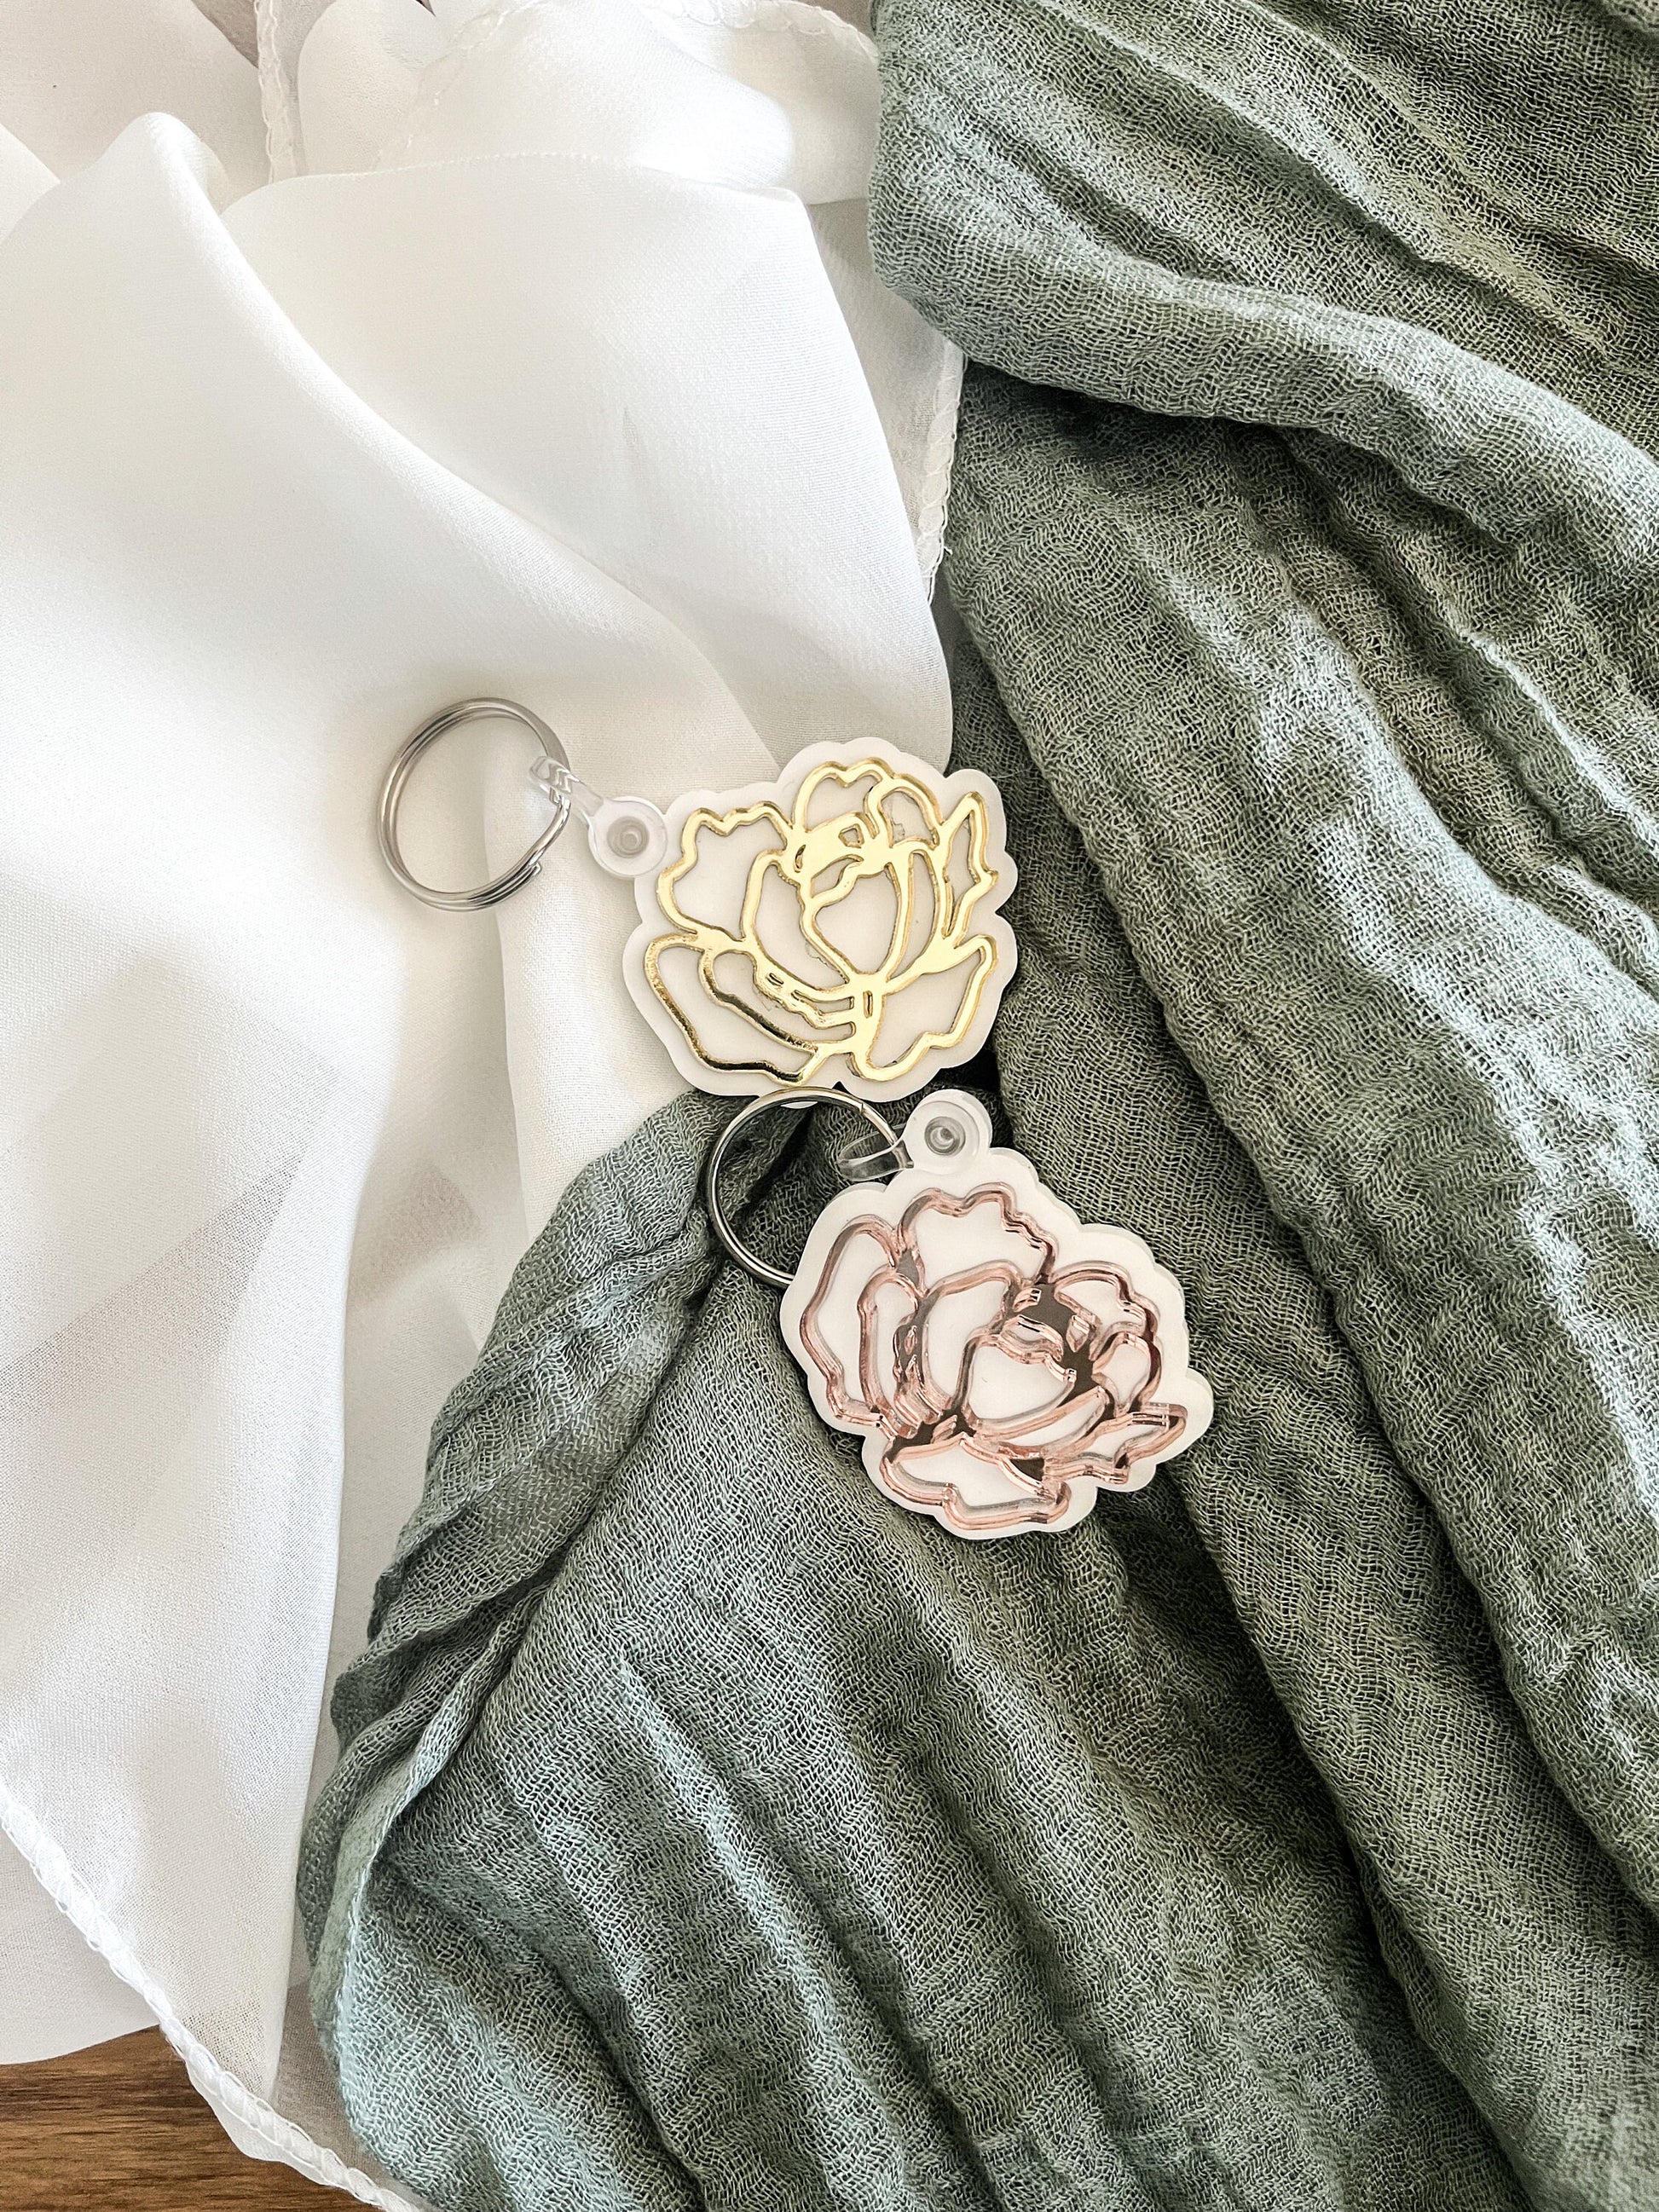 Acrylic Peony Keychain, Modern Floral Keychain, Colorful Keychain, Acrylic Bag Tag, Mother's Day Gift, Customized Gift for Mom